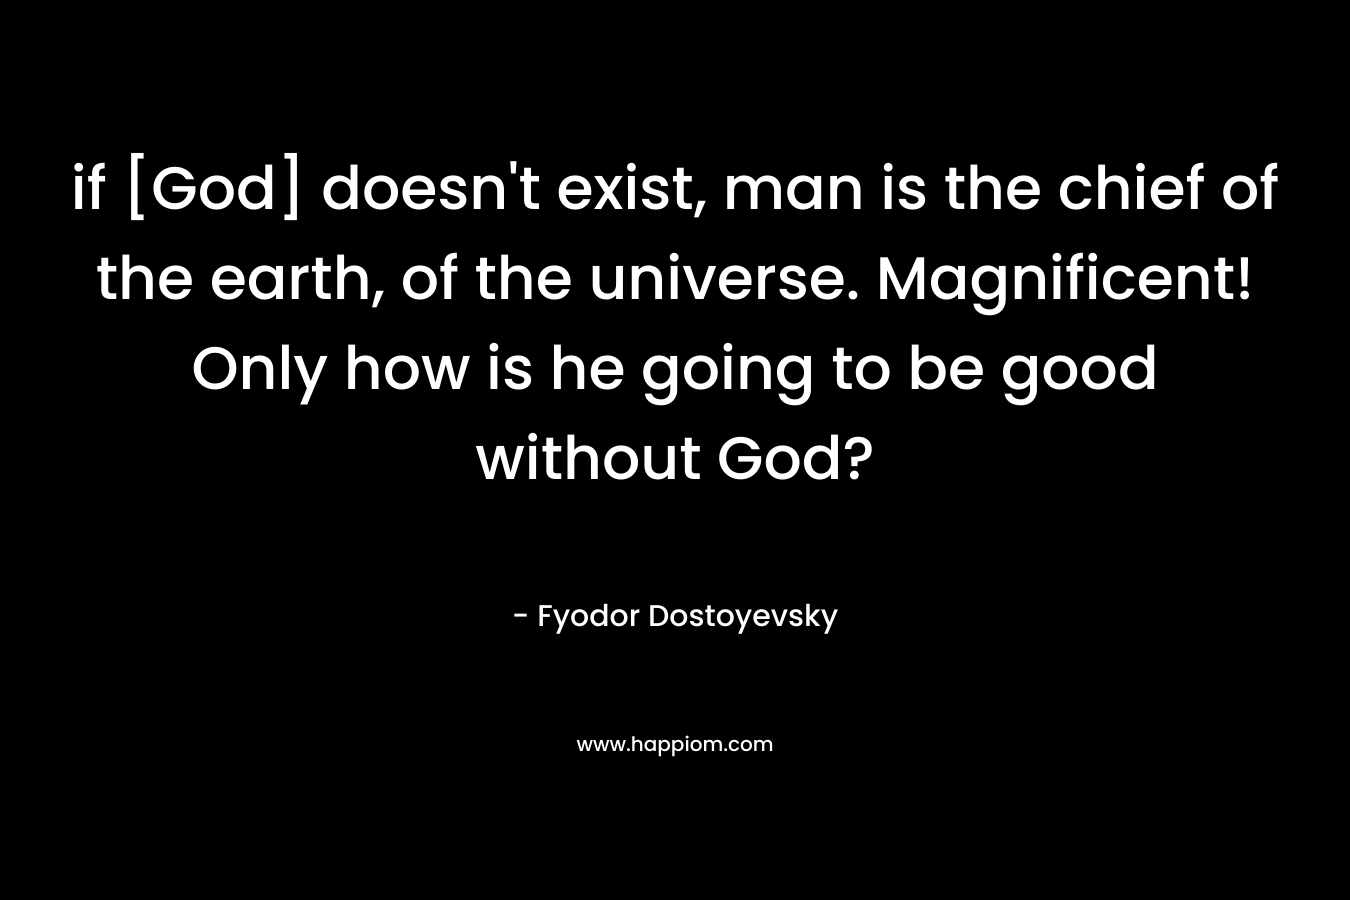 if [God] doesn’t exist, man is the chief of the earth, of the universe. Magnificent! Only how is he going to be good without God? – Fyodor Dostoyevsky